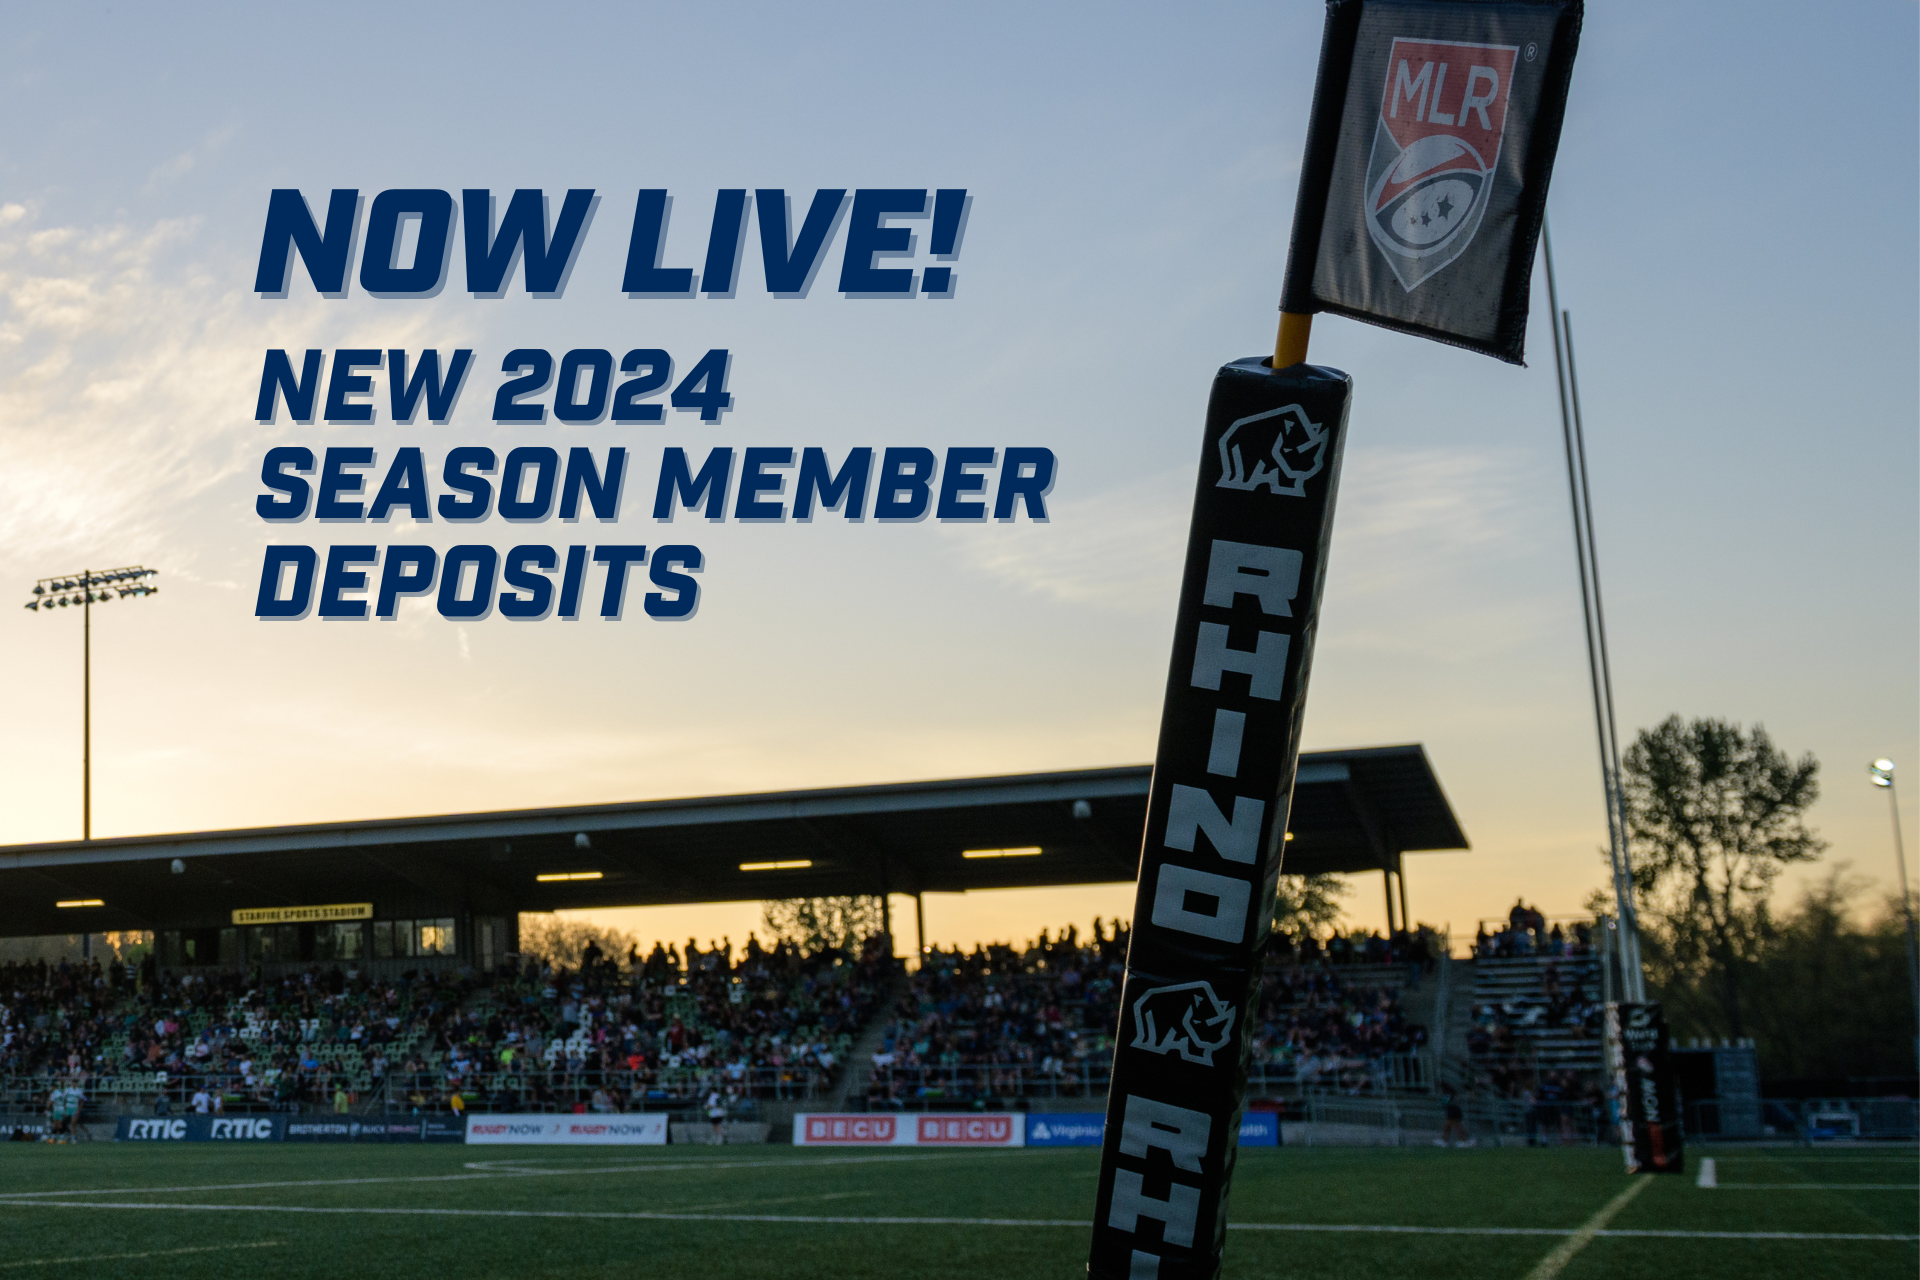 Now Live! New Season Ticket Member Deposits for 2024